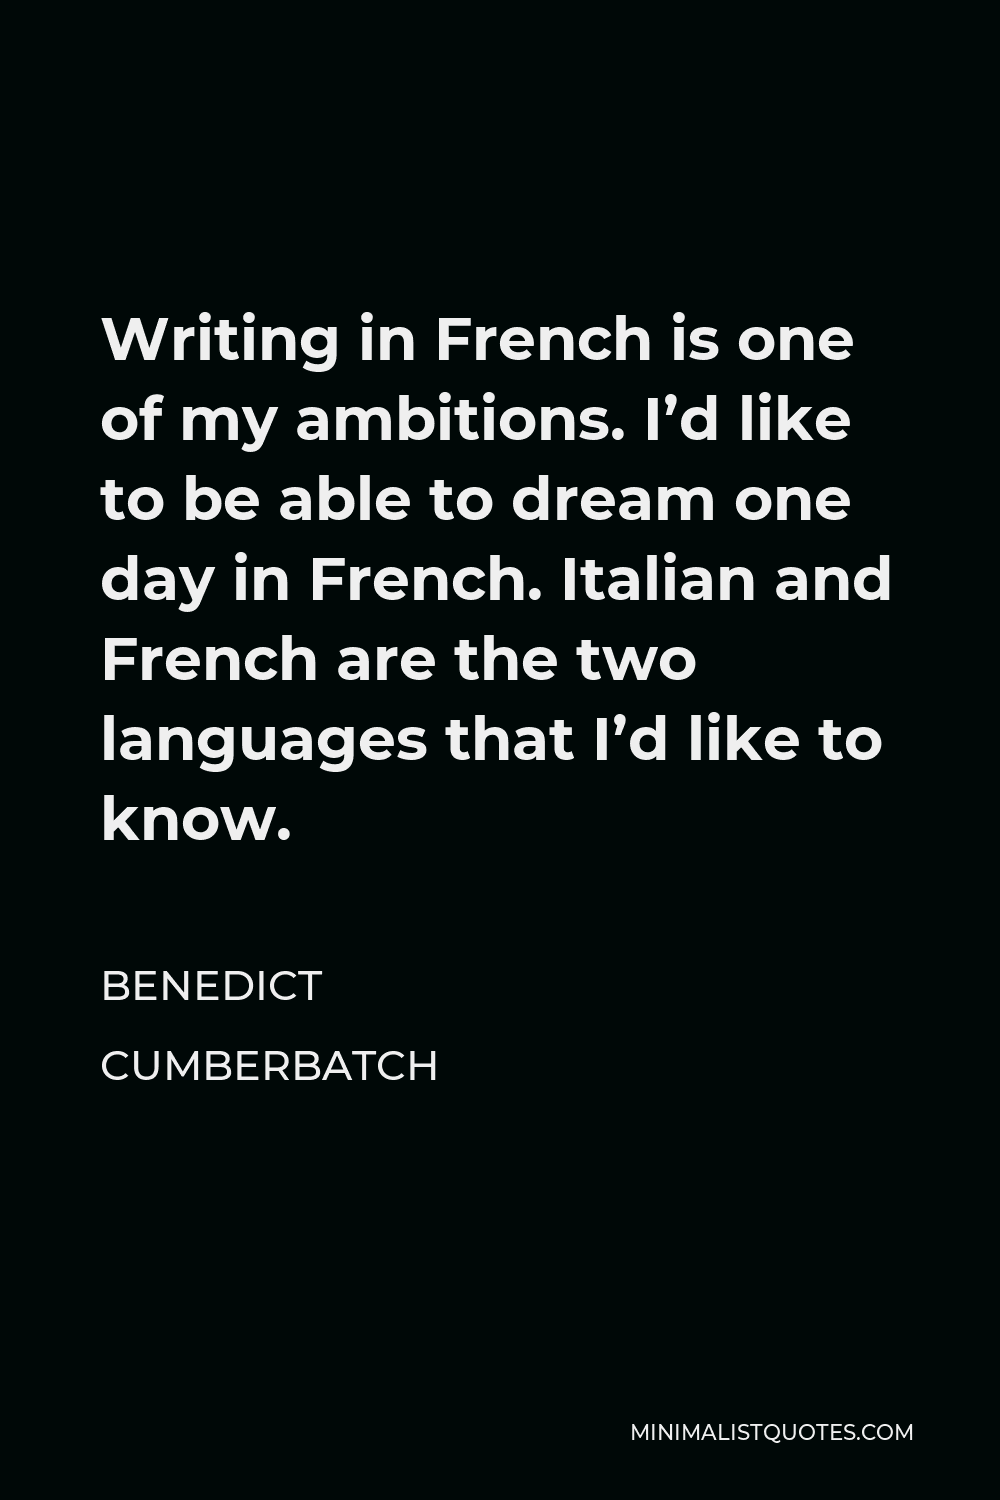 Benedict Cumberbatch Quote - Writing in French is one of my ambitions. I’d like to be able to dream one day in French. Italian and French are the two languages that I’d like to know.